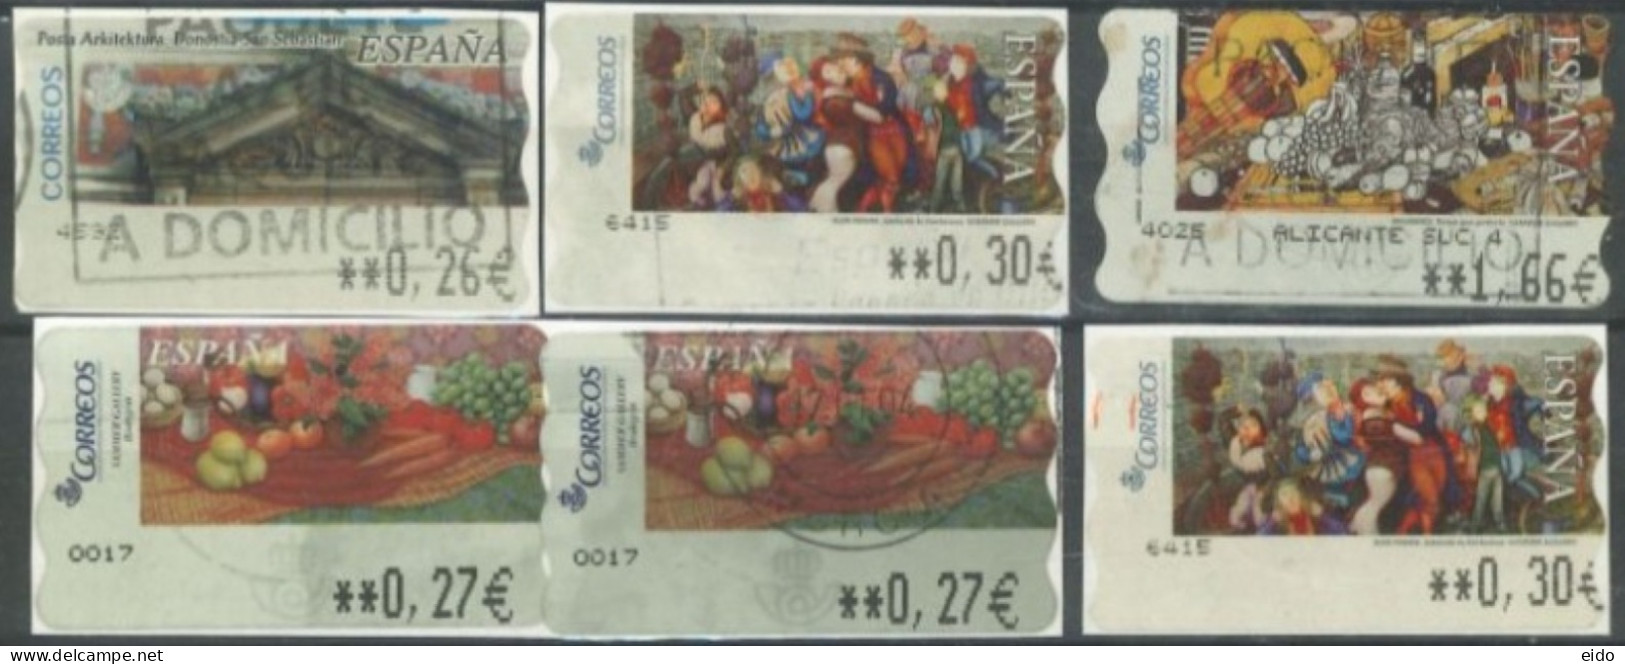 SPAIN- 2003/04,SAN SABASTIAN ARCH. AND SAMMER GALLERY STAMPS LABELS SET OF 6, DIFFERENT VALUES, USED. - Gebraucht